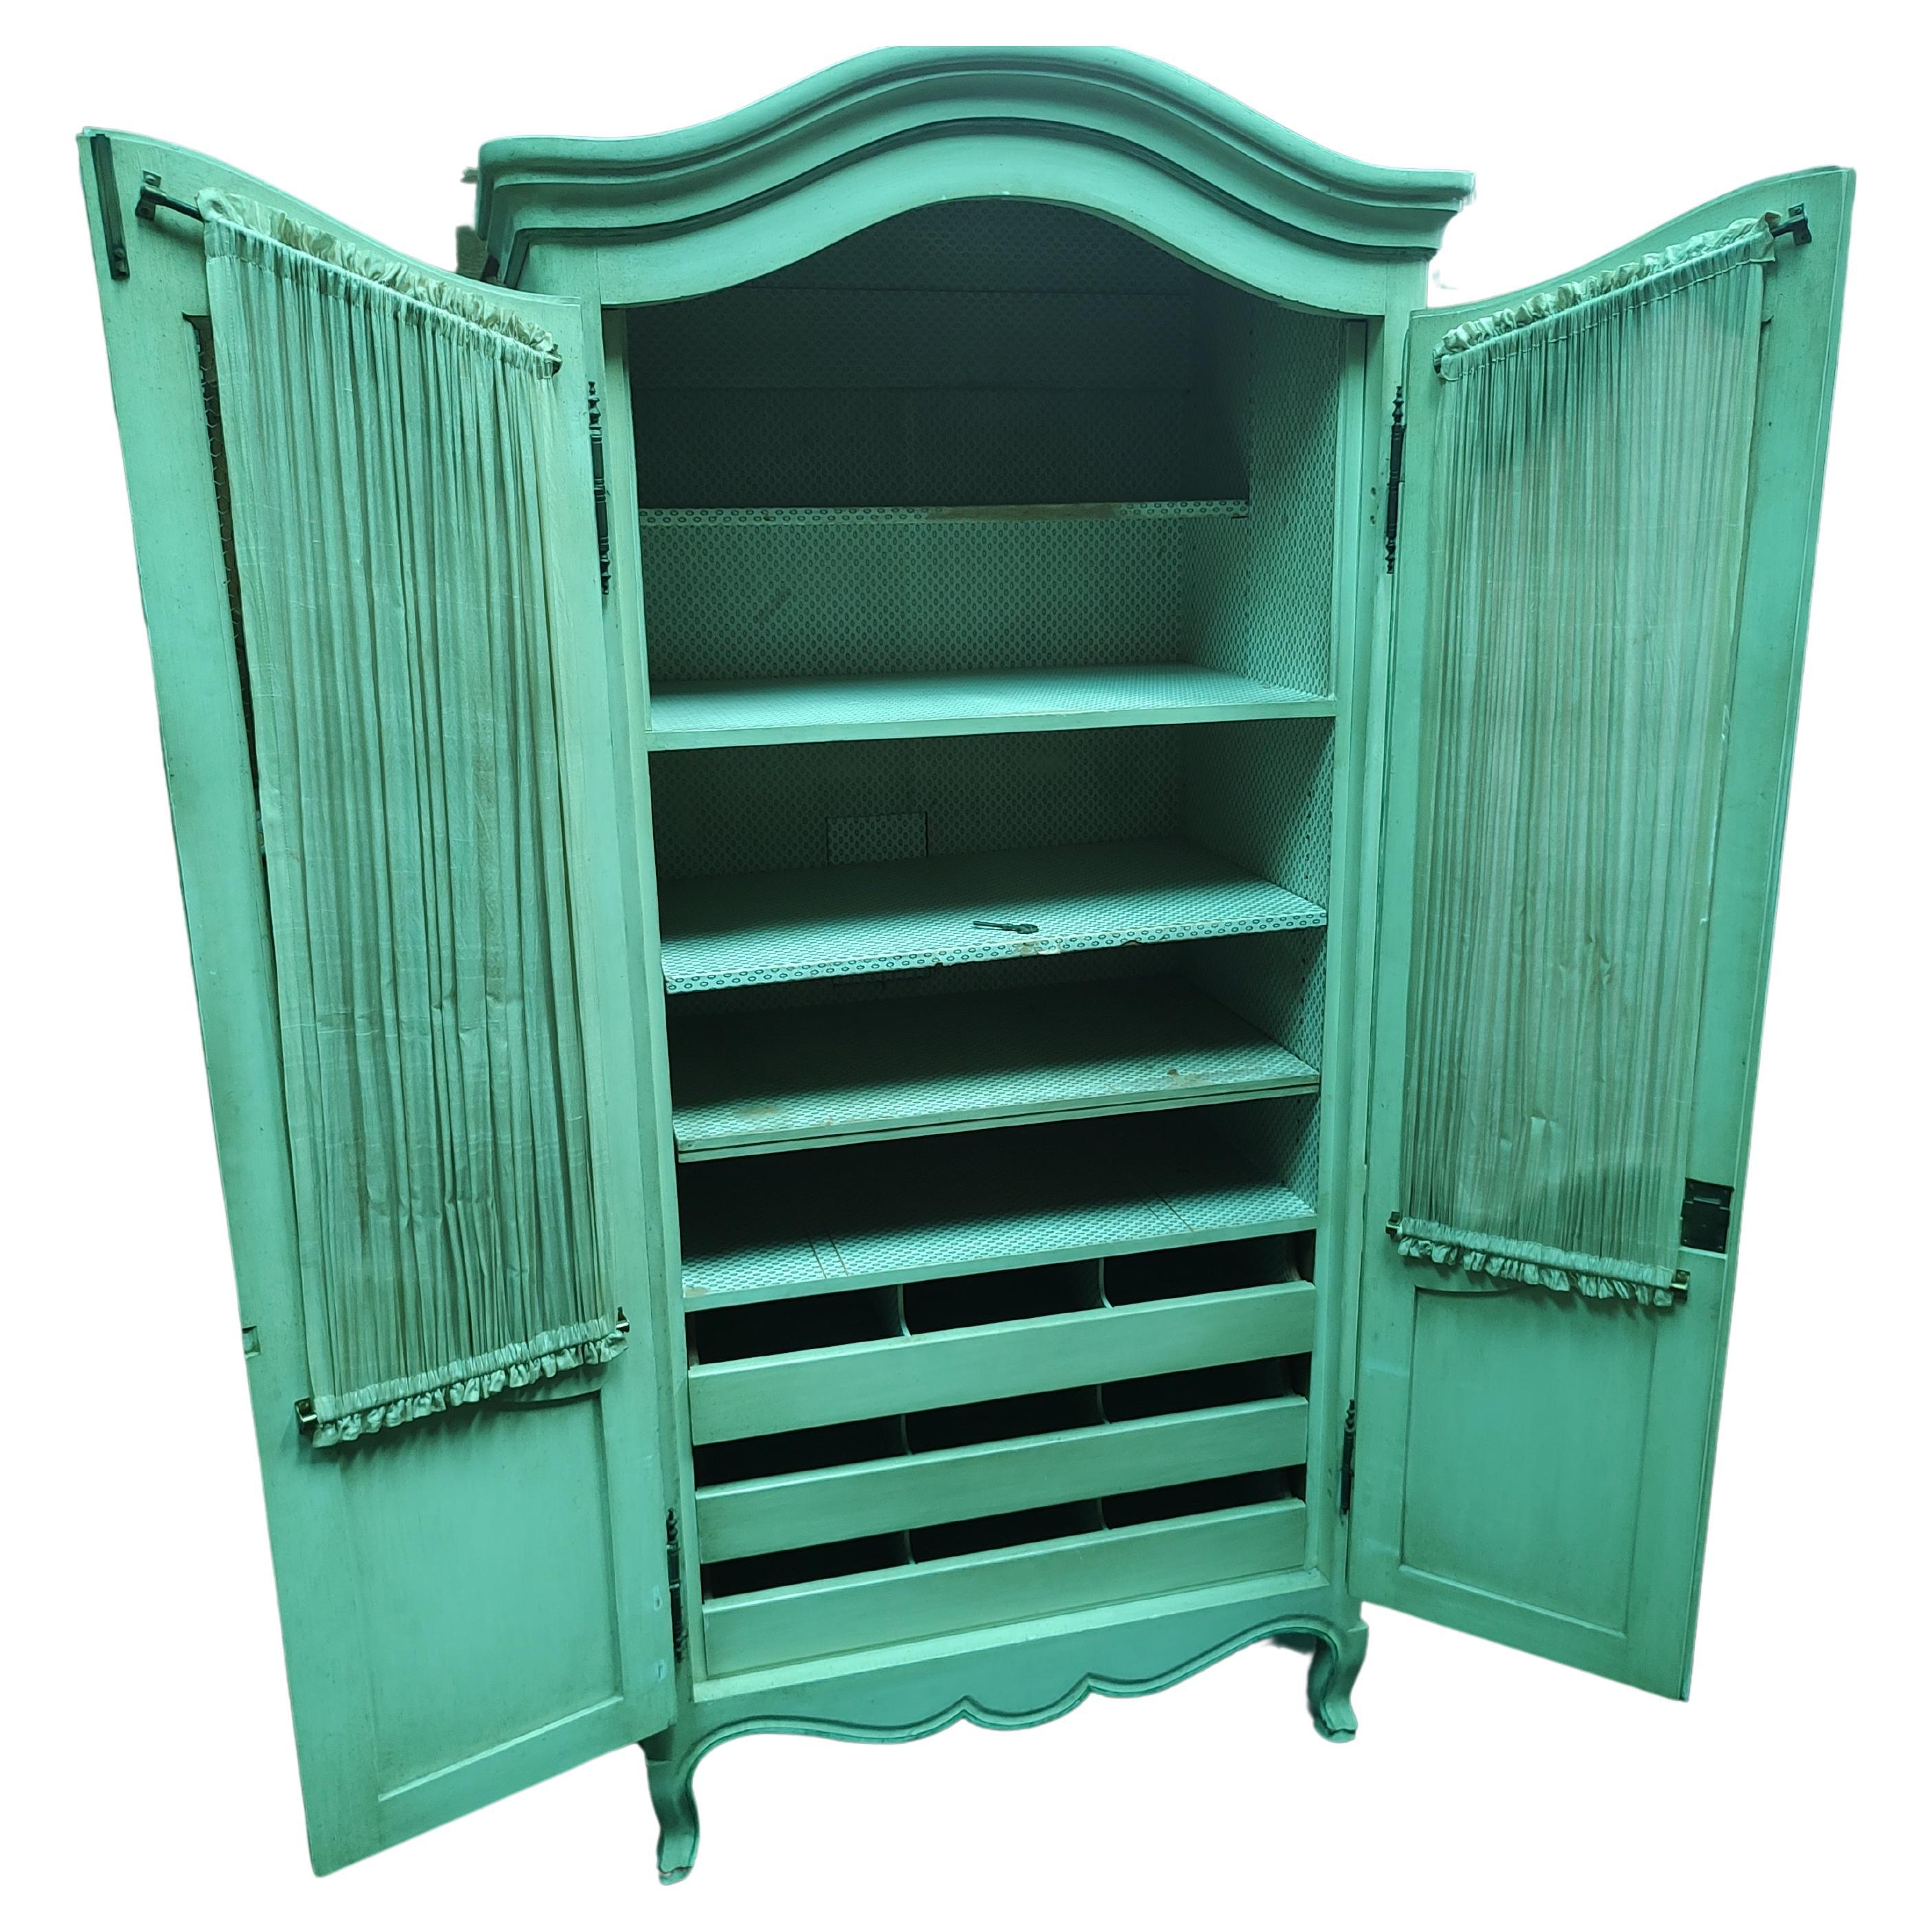 It's White not green. Spacious French Provincial armoire painted white with green accents. Plenty of storage with 5 adjustable shelves and 3 pullout drawers with dividers. Brass hardware, open style doors with screen mesh and curtains, (old need